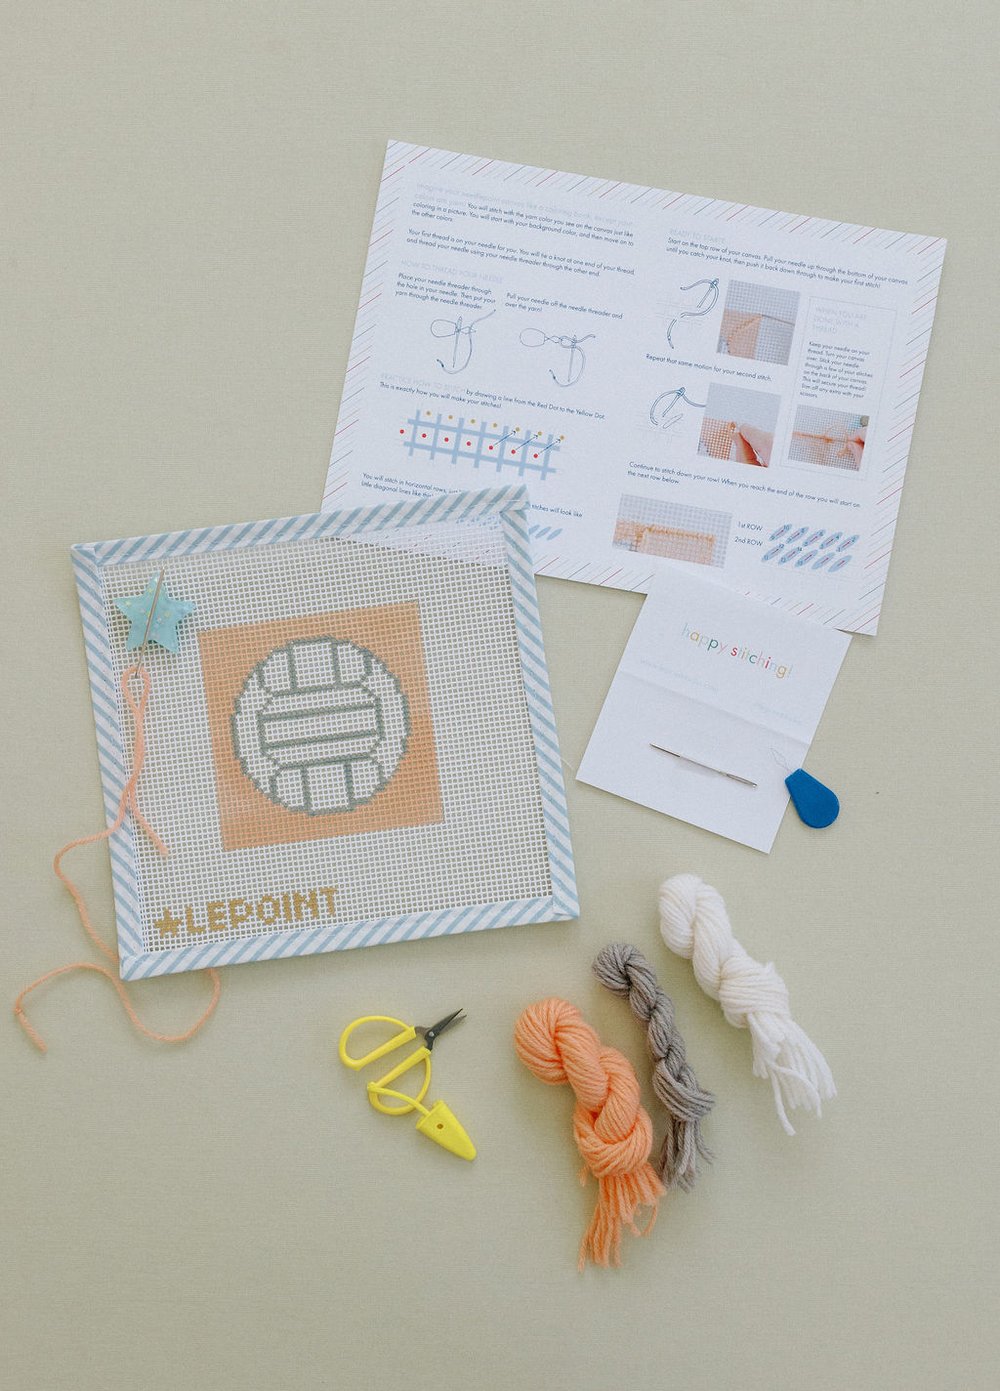 Teach your kids how to needlepoint with Little Le Point Kids Needlepoint  Kits. They come with every — Le Point Studio